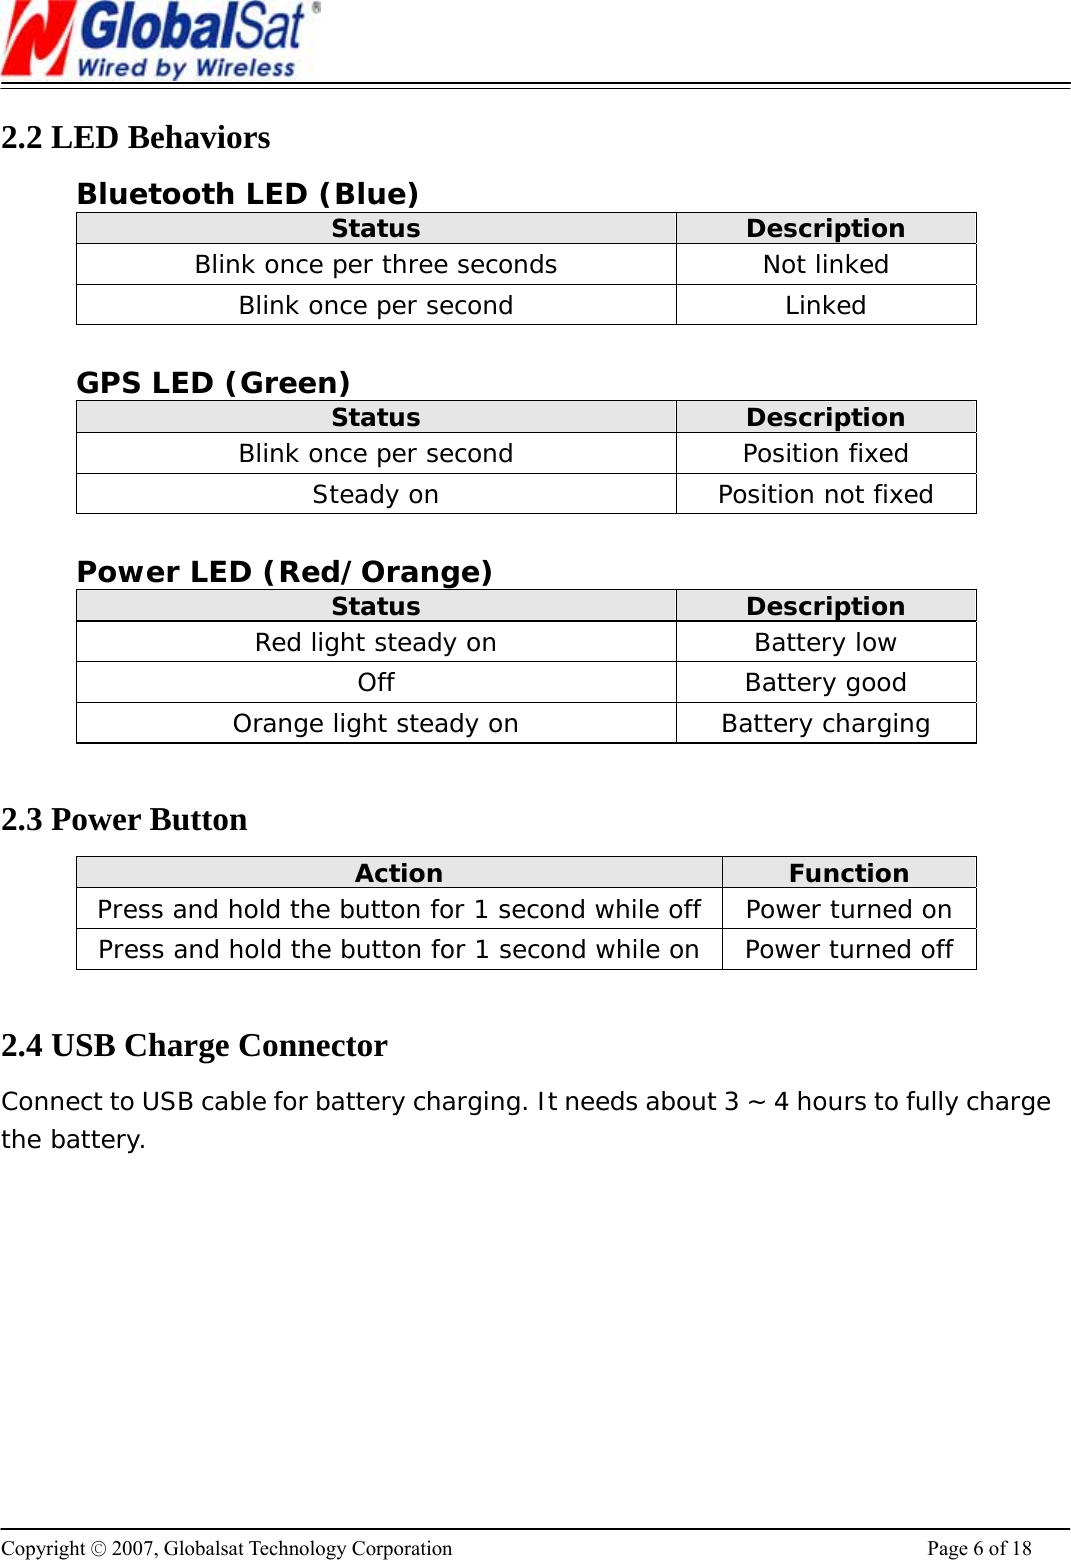                                                                      Copyright © 2007, Globalsat Technology Corporation  Page 6 of 18 2.2 LED Behaviors Bluetooth LED (Blue) Status  Description Blink once per three seconds  Not linked Blink once per second  Linked  GPS LED (Green) Status  Description Blink once per second  Position fixed Steady on  Position not fixed  Power LED (Red/Orange) Status  Description Red light steady on  Battery low Off Battery good Orange light steady on  Battery charging  2.3 Power Button Action  Function Press and hold the button for 1 second while off  Power turned on Press and hold the button for 1 second while on  Power turned off  2.4 USB Charge Connector Connect to USB cable for battery charging. It needs about 3 ~ 4 hours to fully charge the battery.   